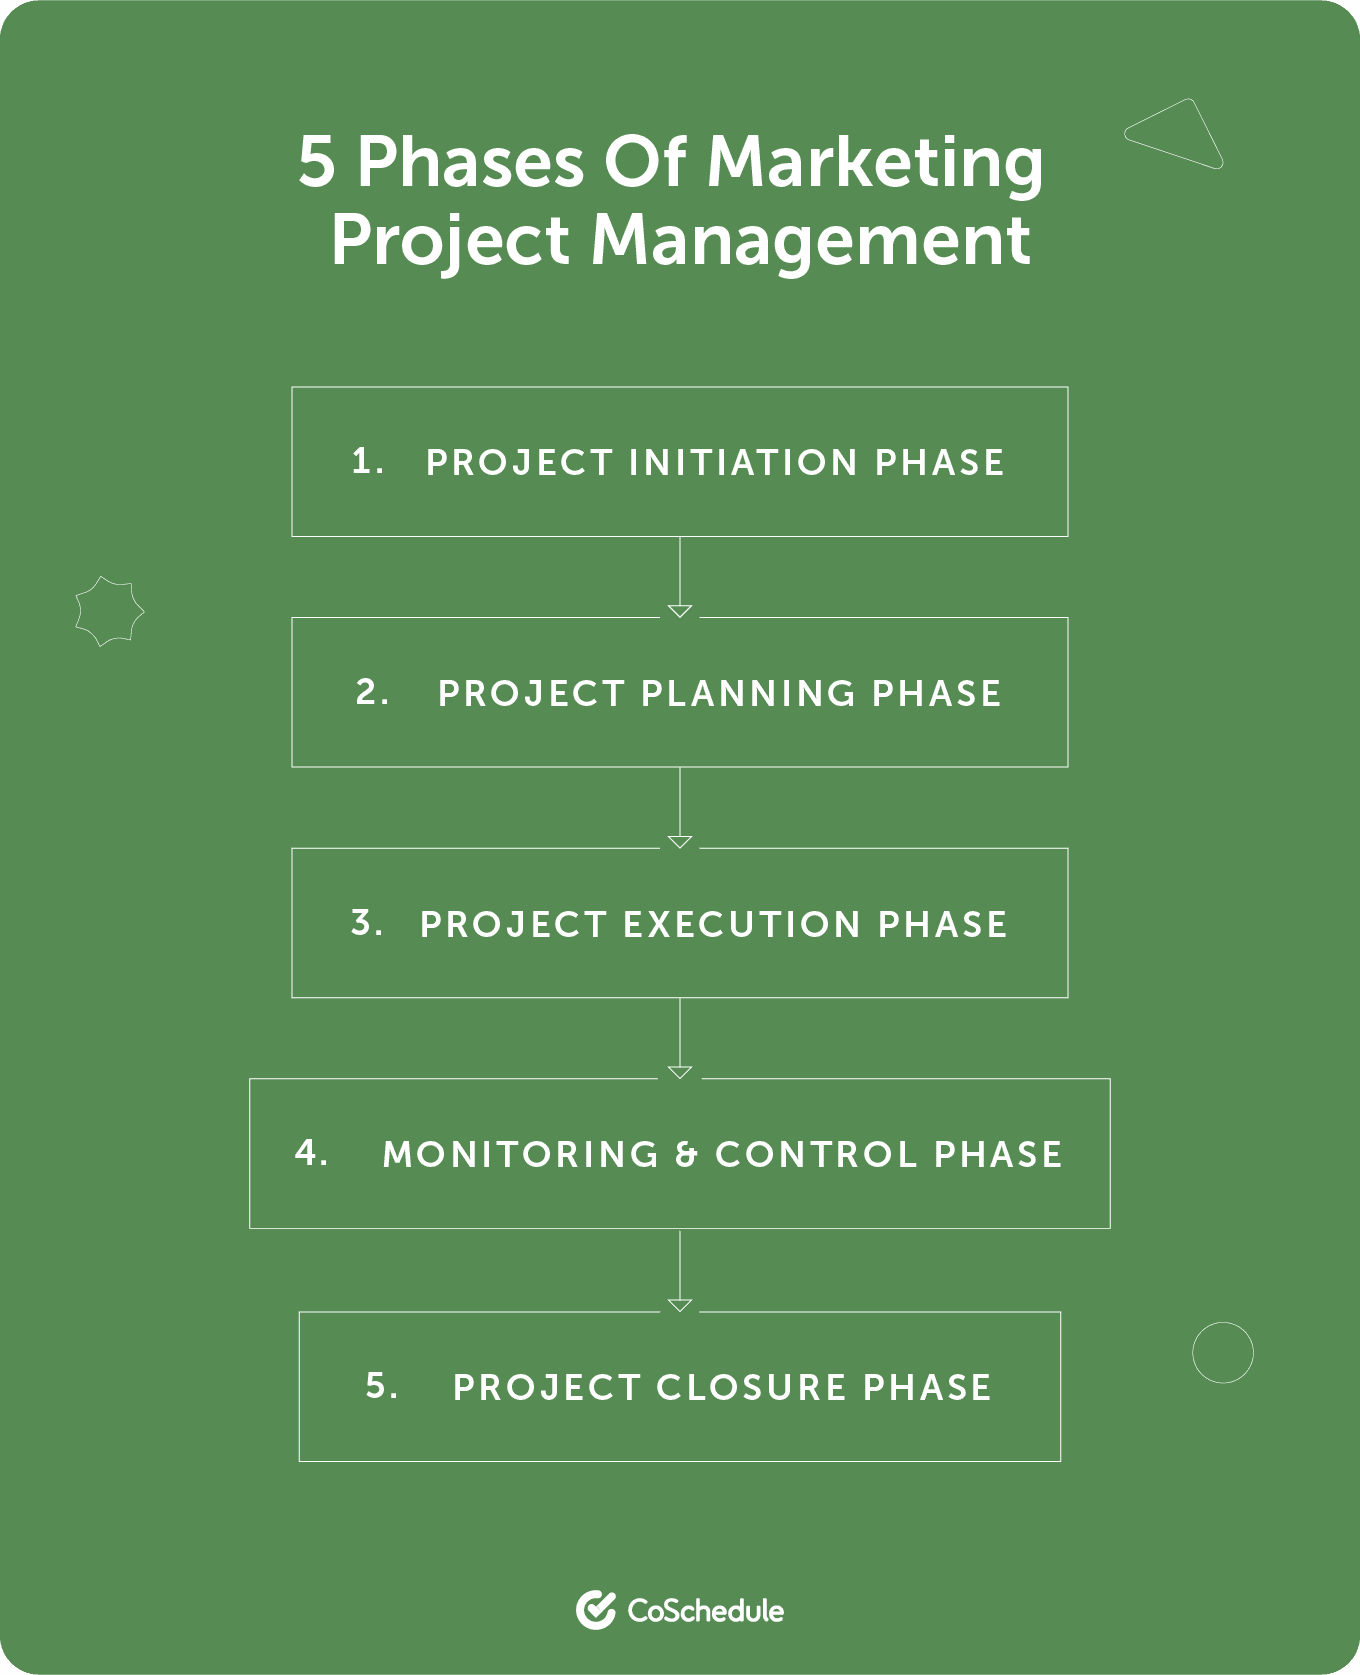 5 Phases of Marketing Project Management by step